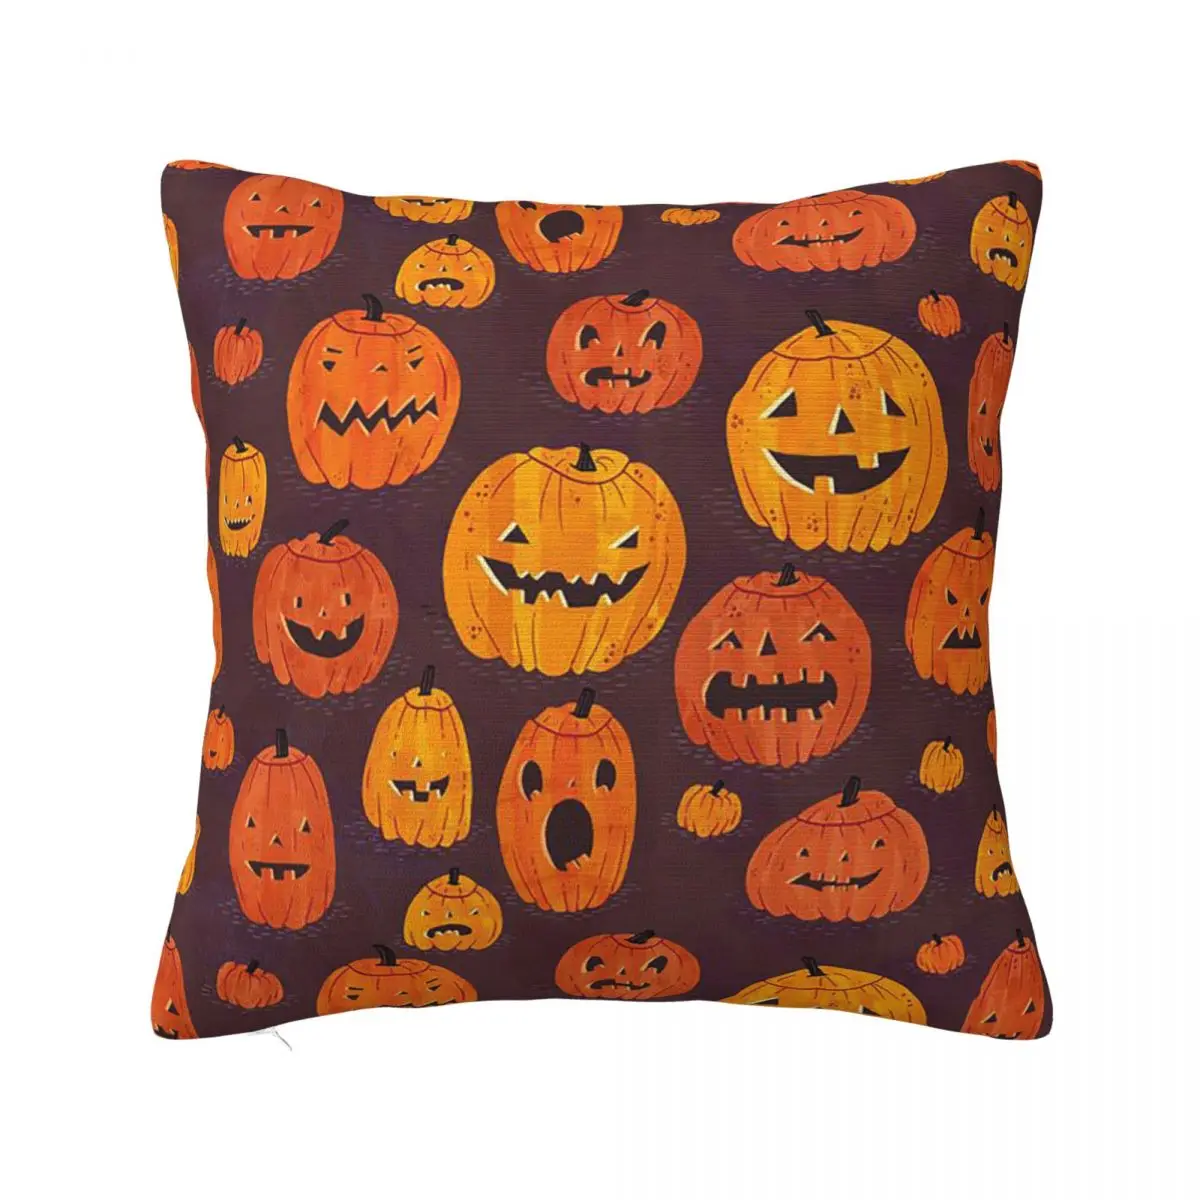 

Halloween Happy Pillowcase Printing Polyester Cushion Cover Decoration Pumpkin Pillow Case Cover Home Zippered 40*40cm